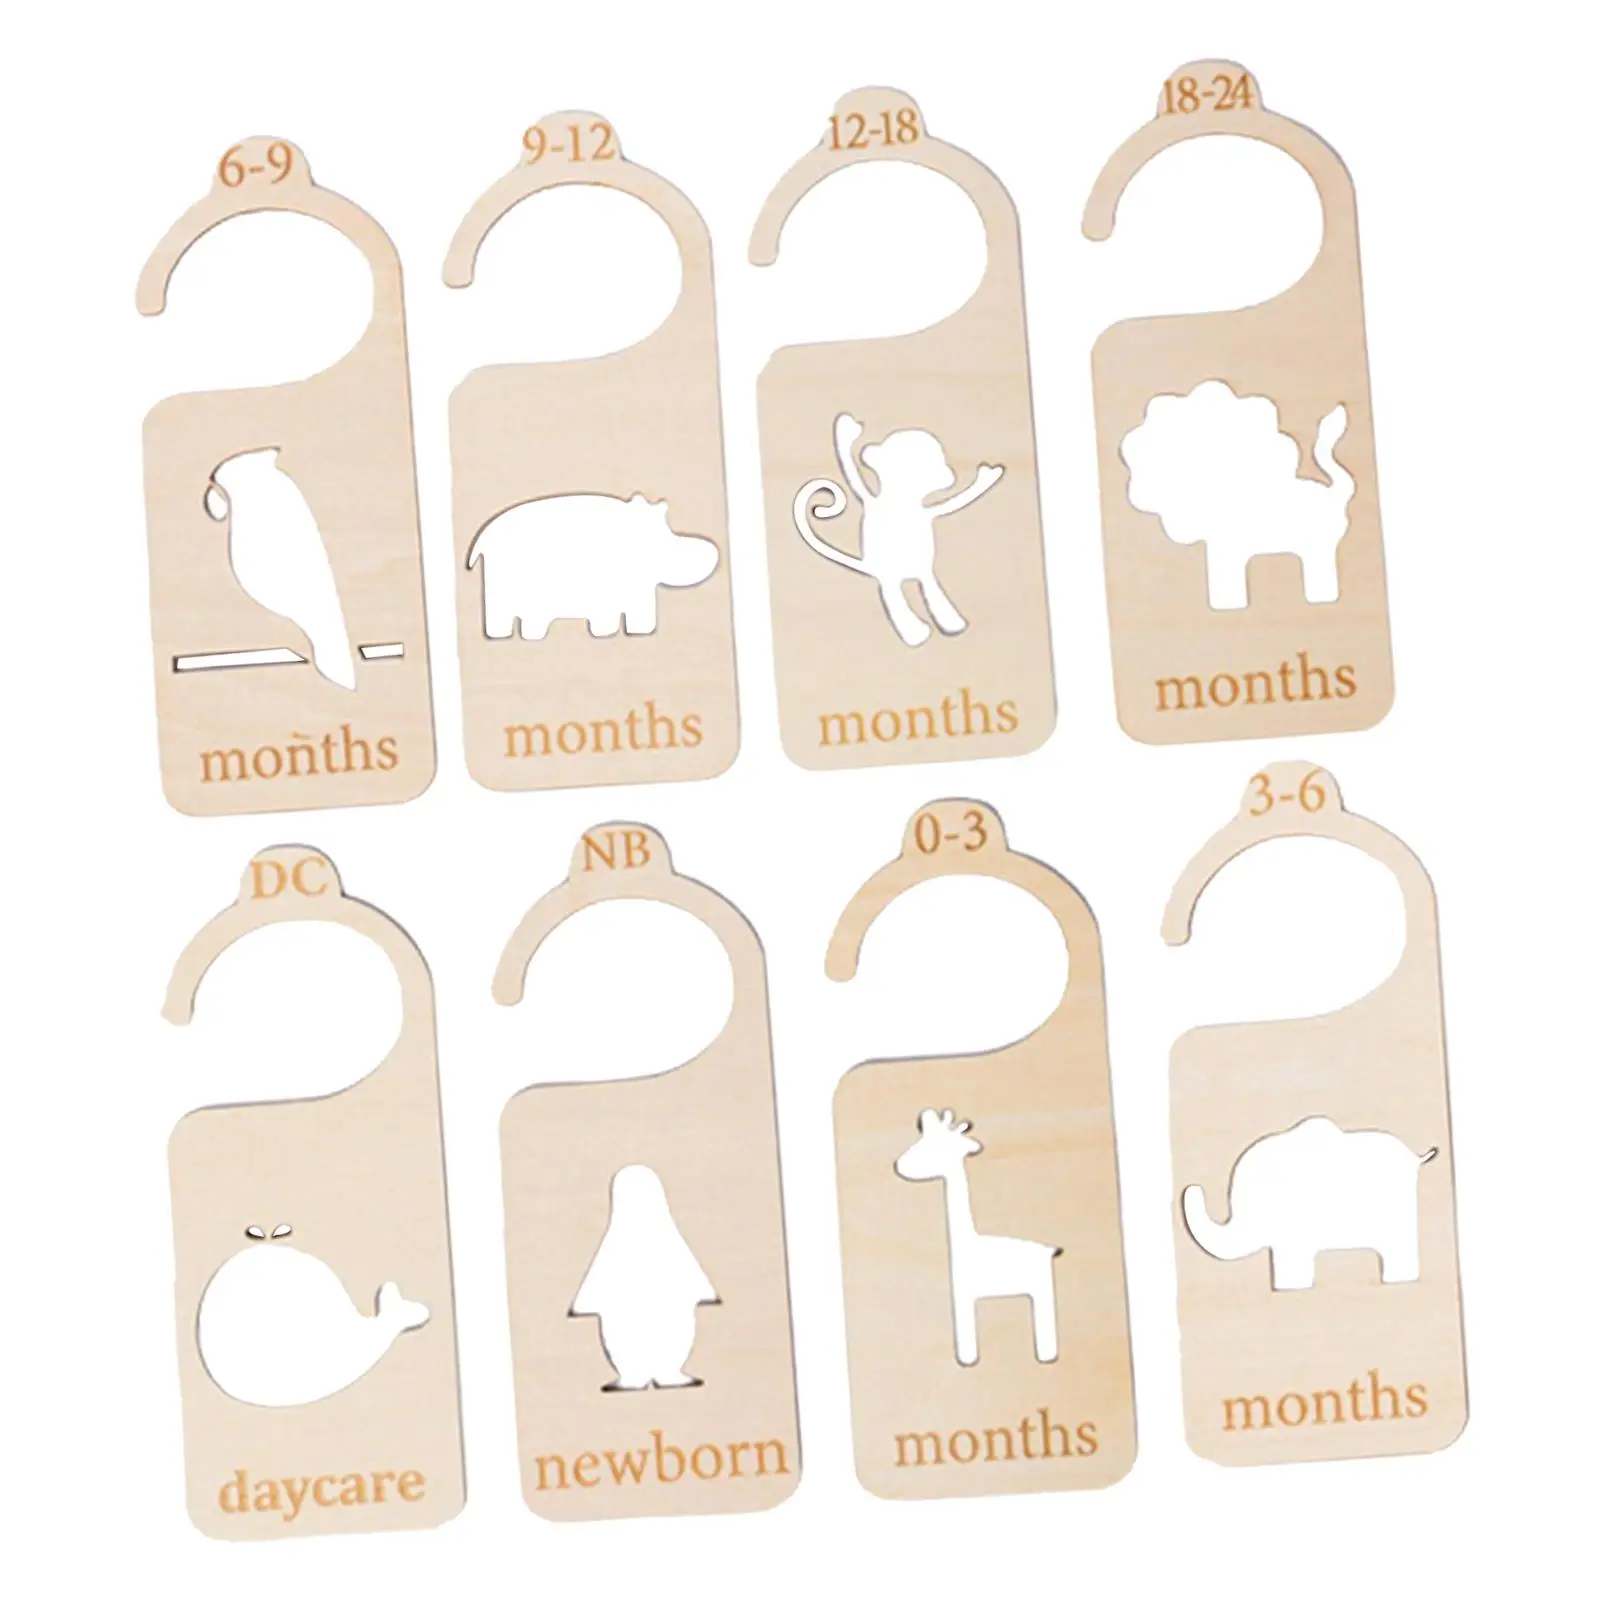 8x Wooden Baby Closet Dividers Baby Clothing Size Age Dividers for